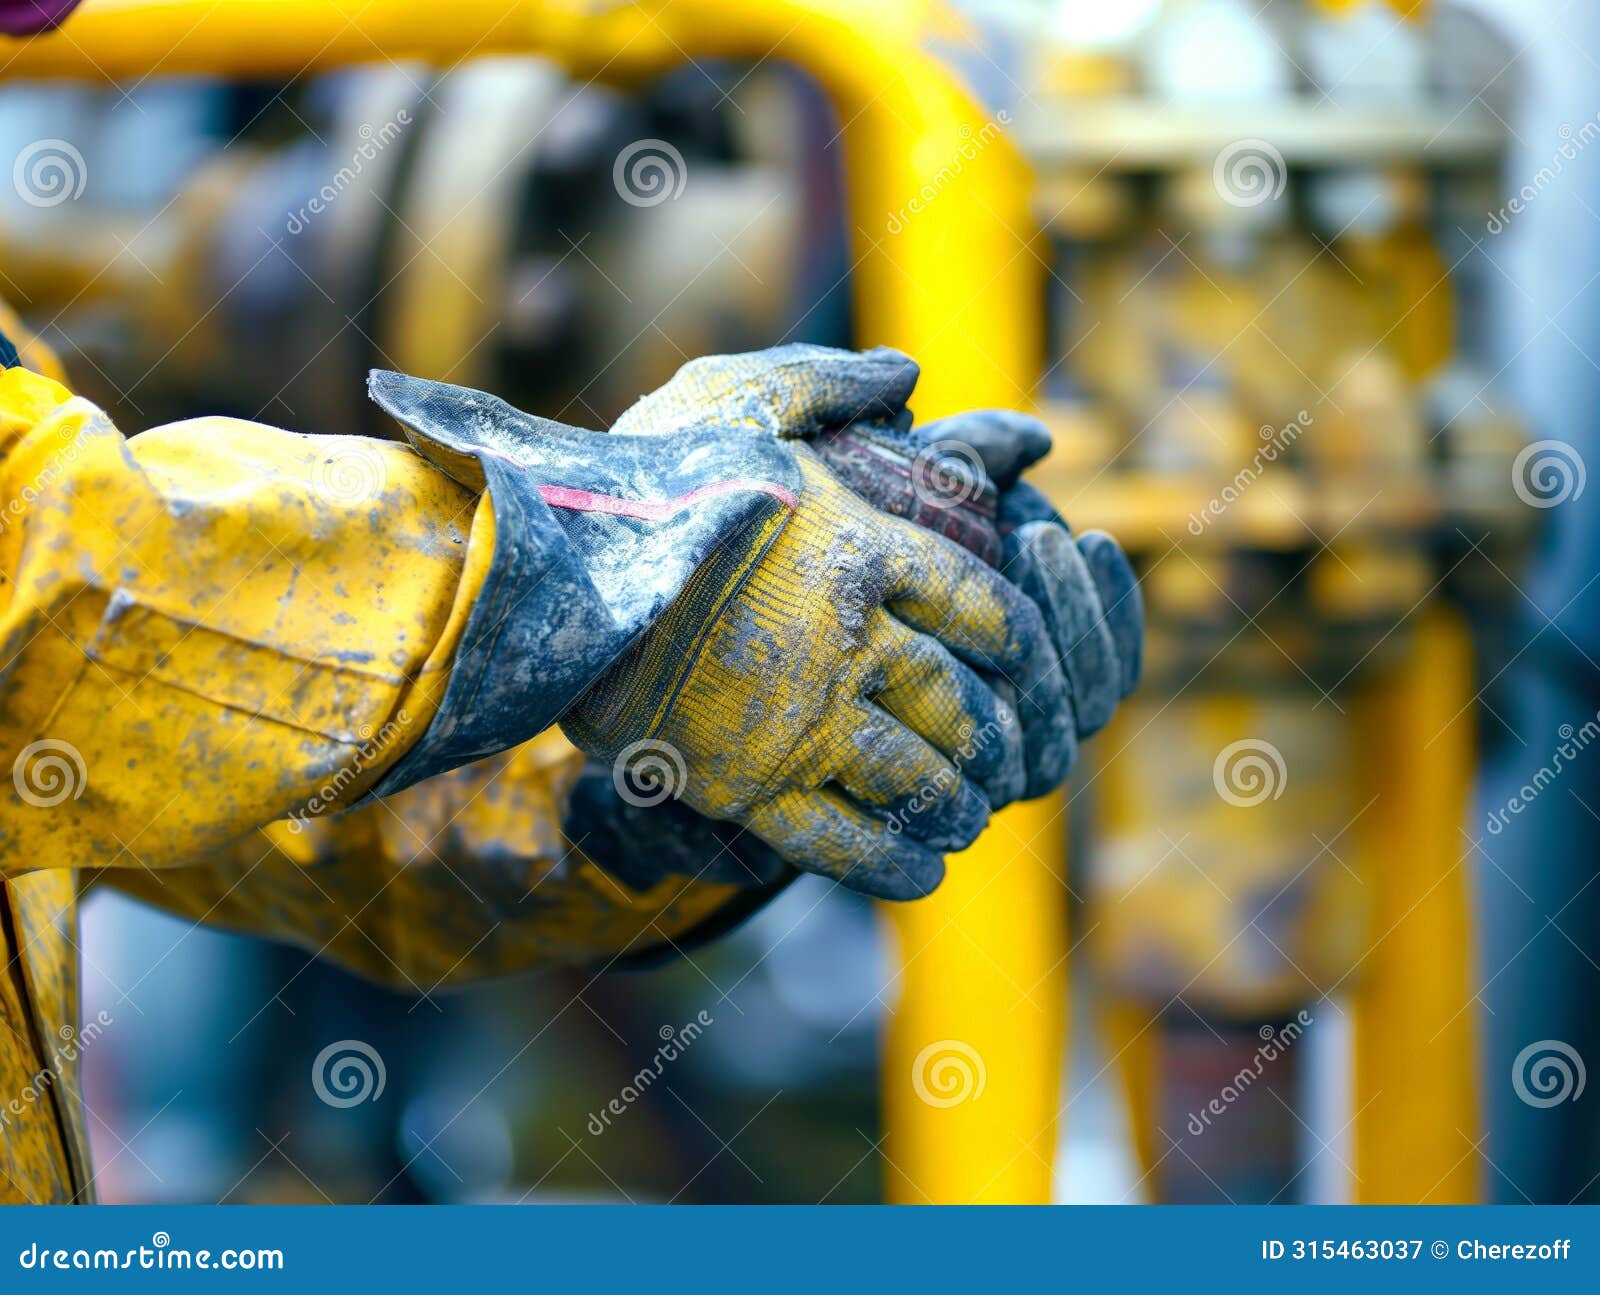 industrial worker gripping machinery